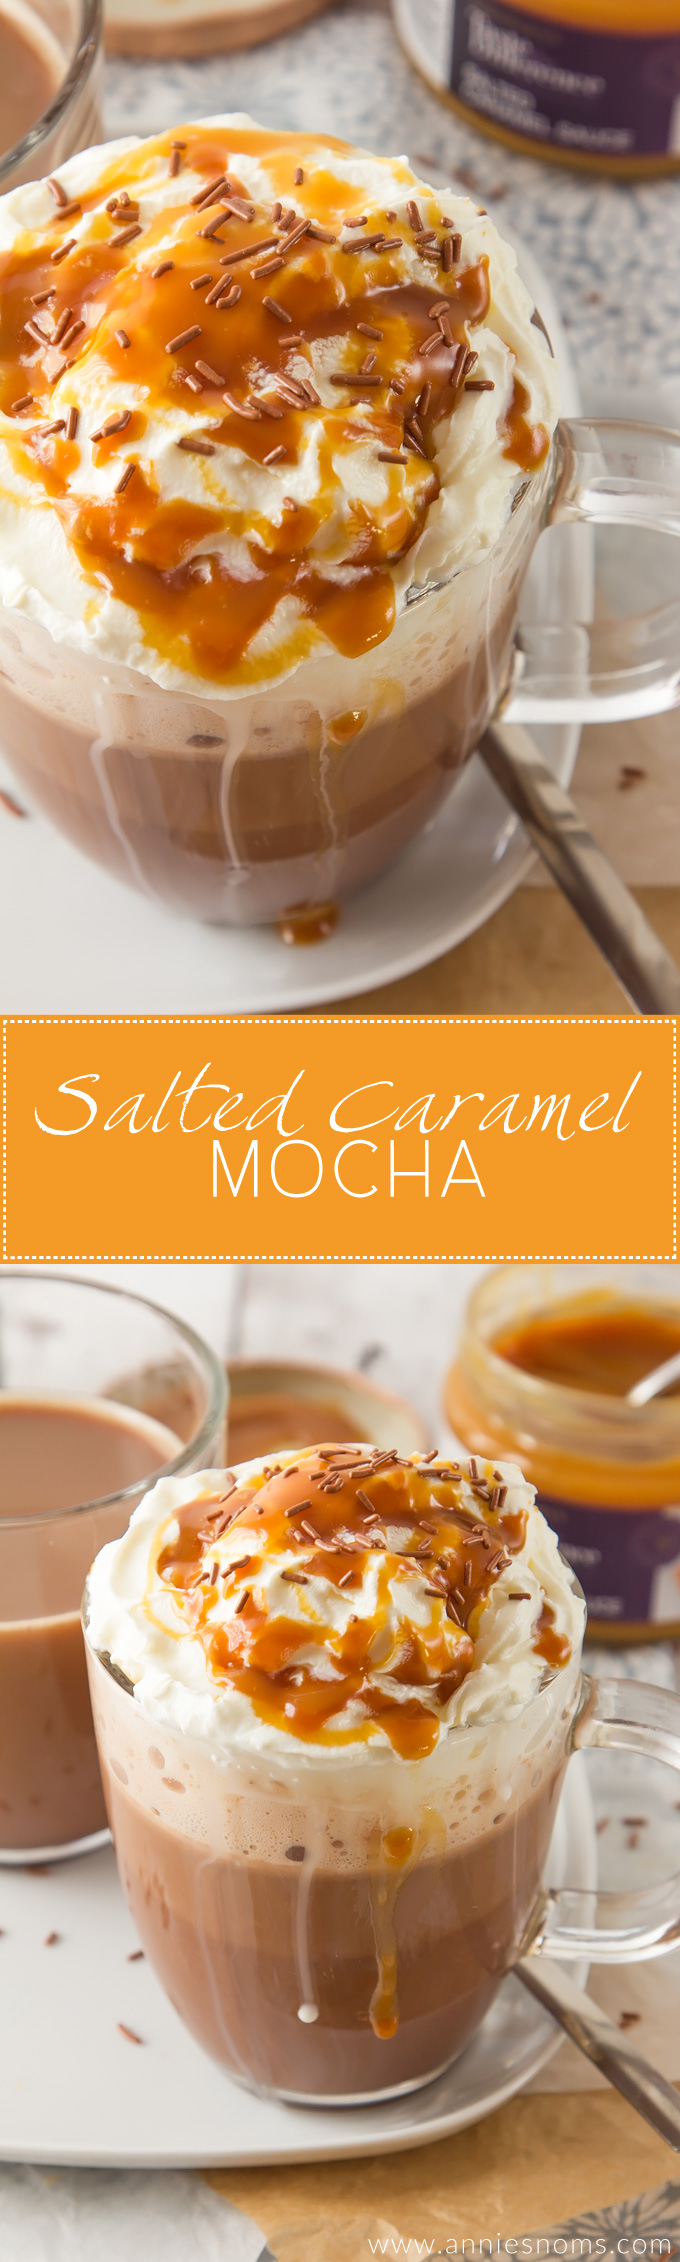 Craving a Salted Caramel Mocha, but not near a Starbucks? Then make my version of their delicious, sweet and salty drink in under 10 minutes!